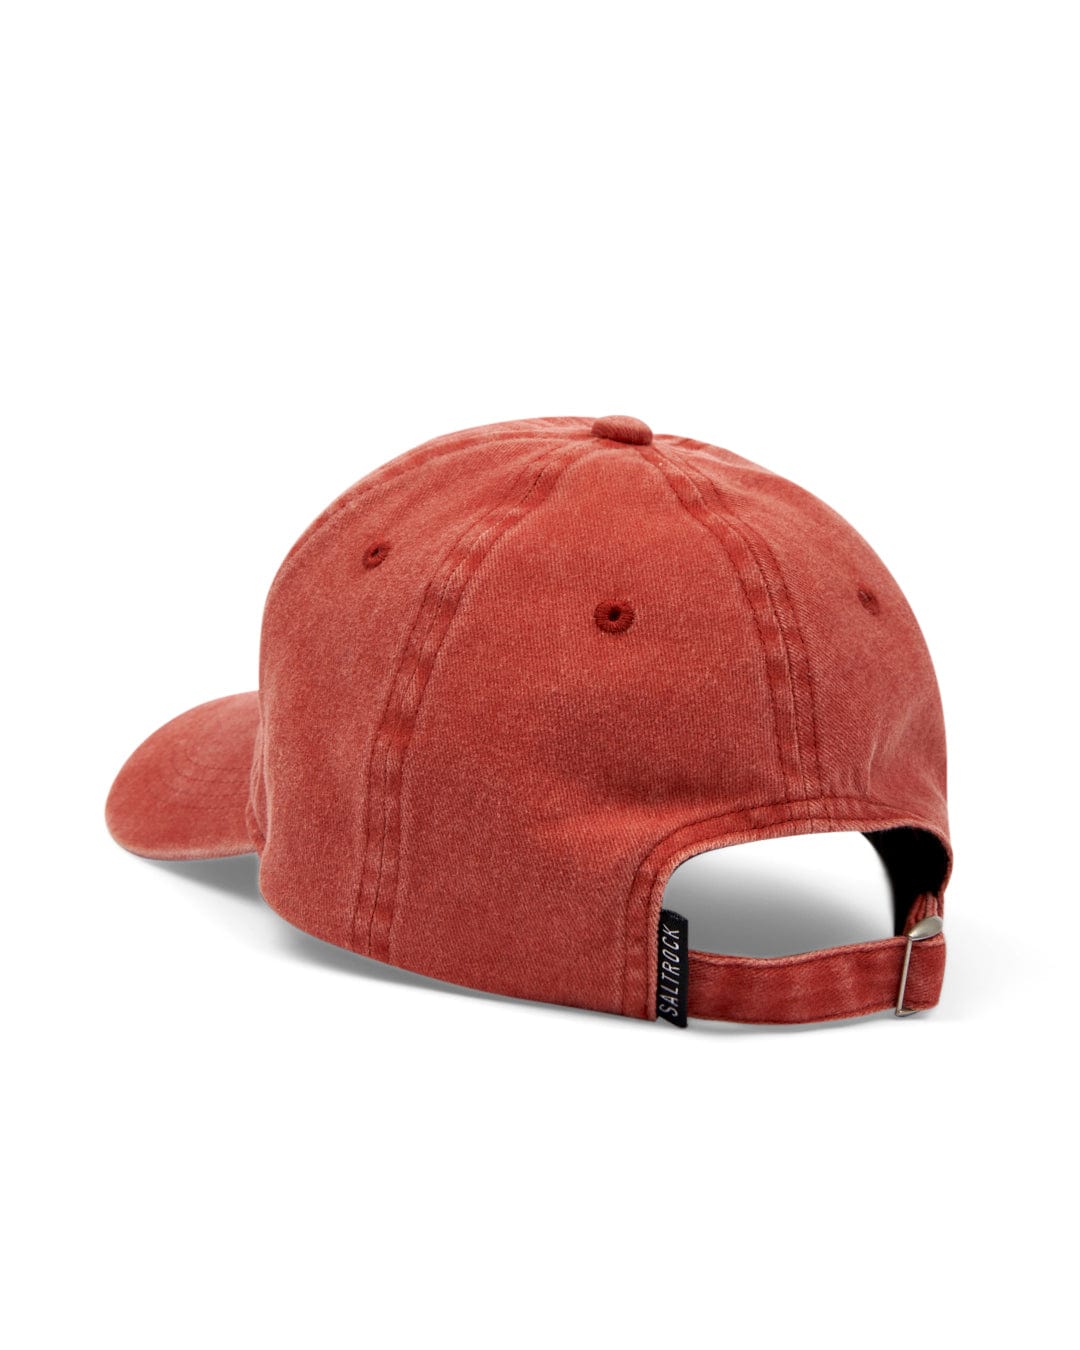 Palm Cap - Burnt Orange cotton baseball cap with an adjustable strap, isolated on a white background by Saltrock.